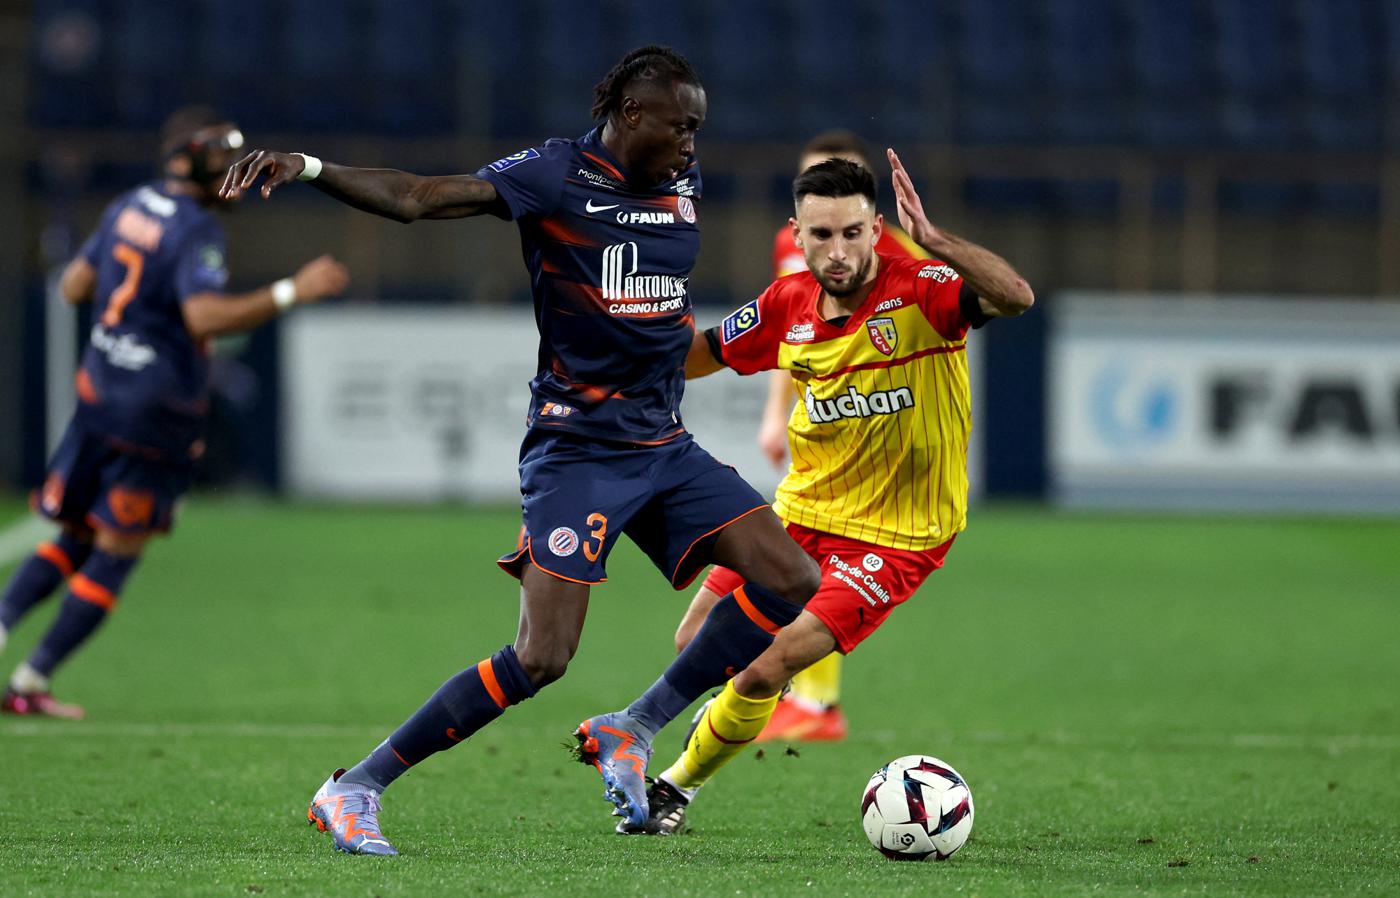 Montpellier vs Lans - 1:1. French Championship, 25th round. Match review, statistics.